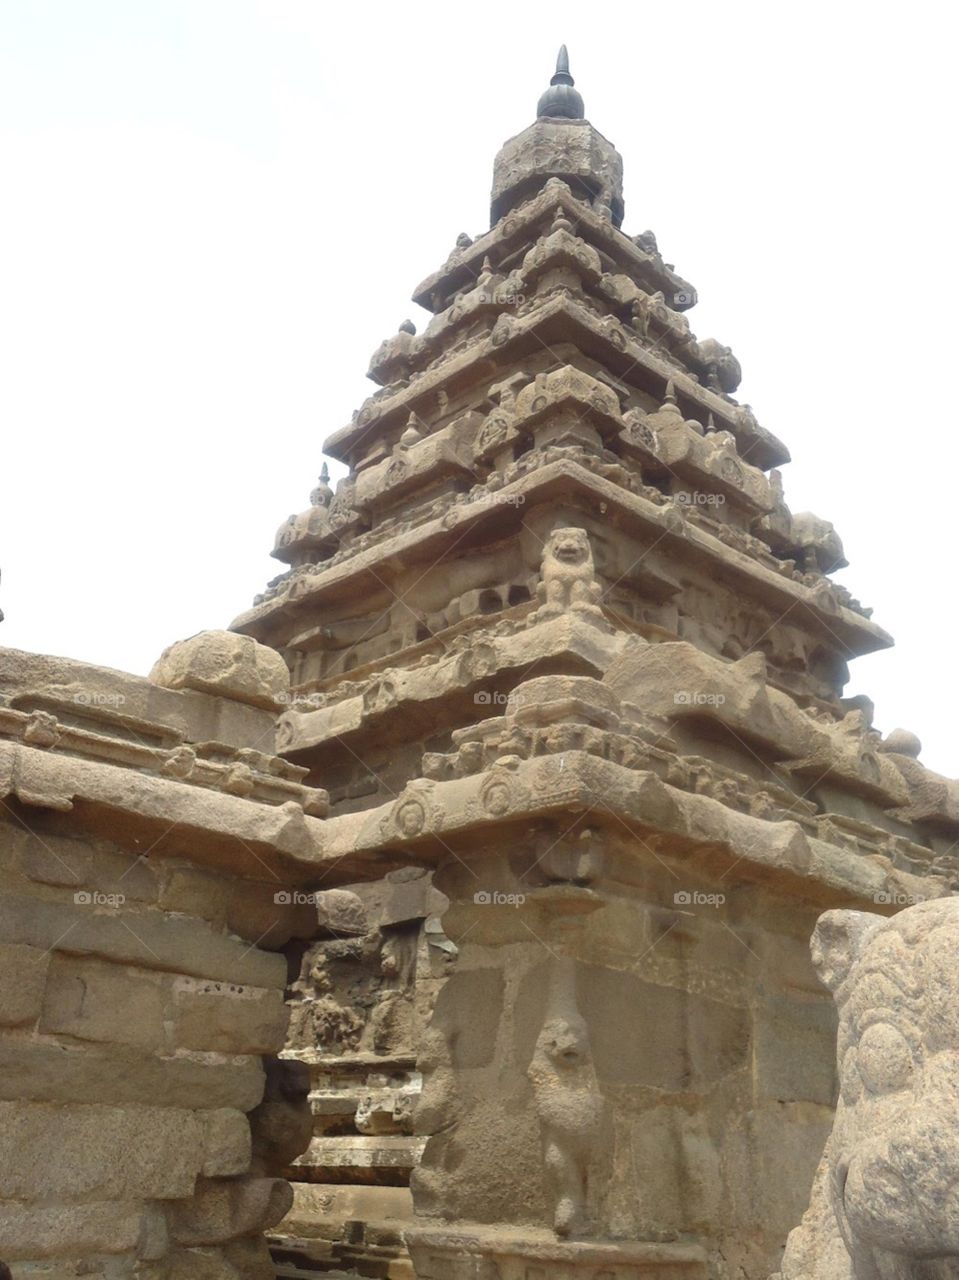 Temple side view